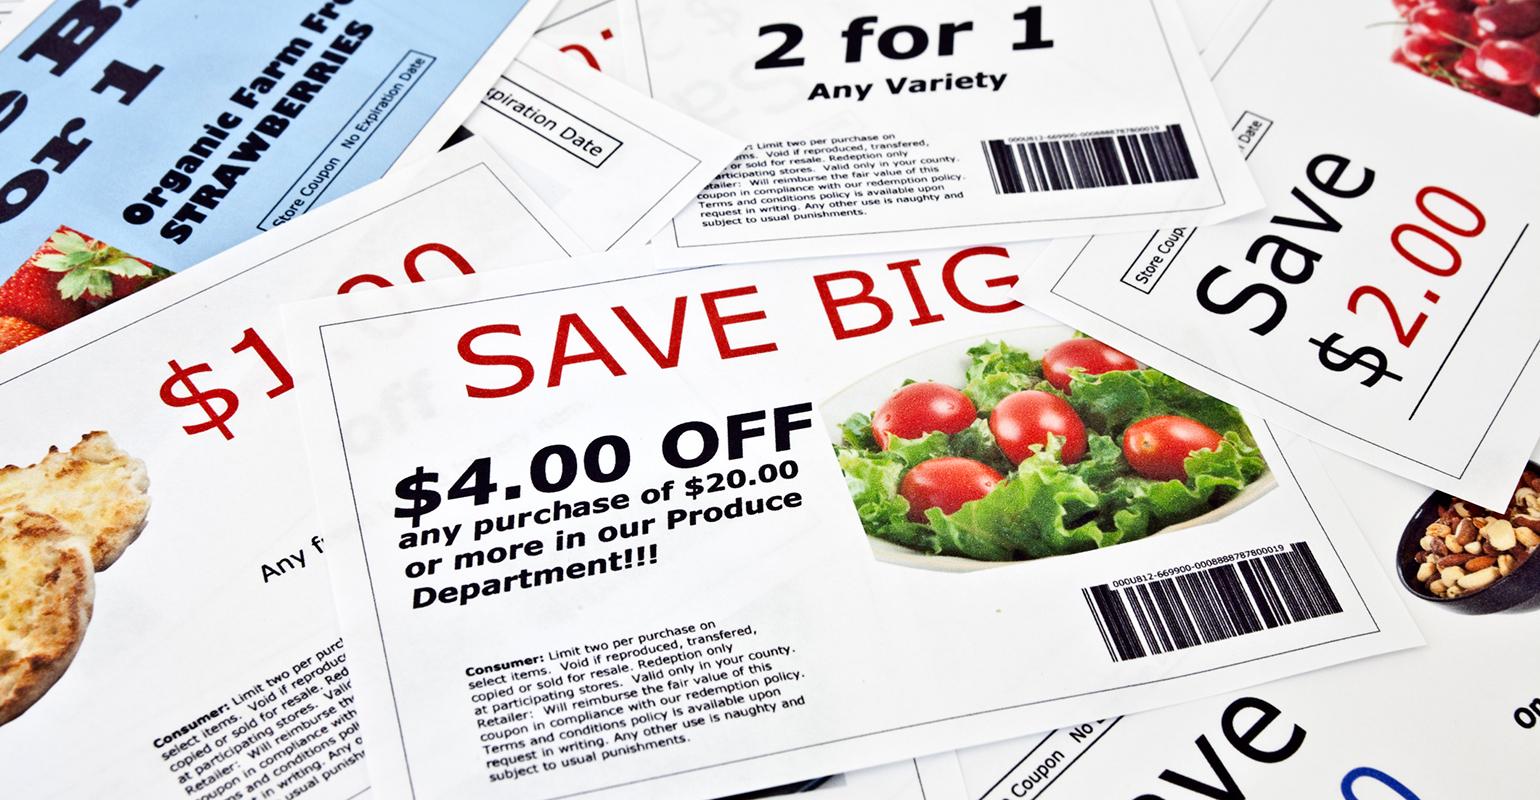 Viewpoint: Study shows coupons change buyer behavior | Supermarket News